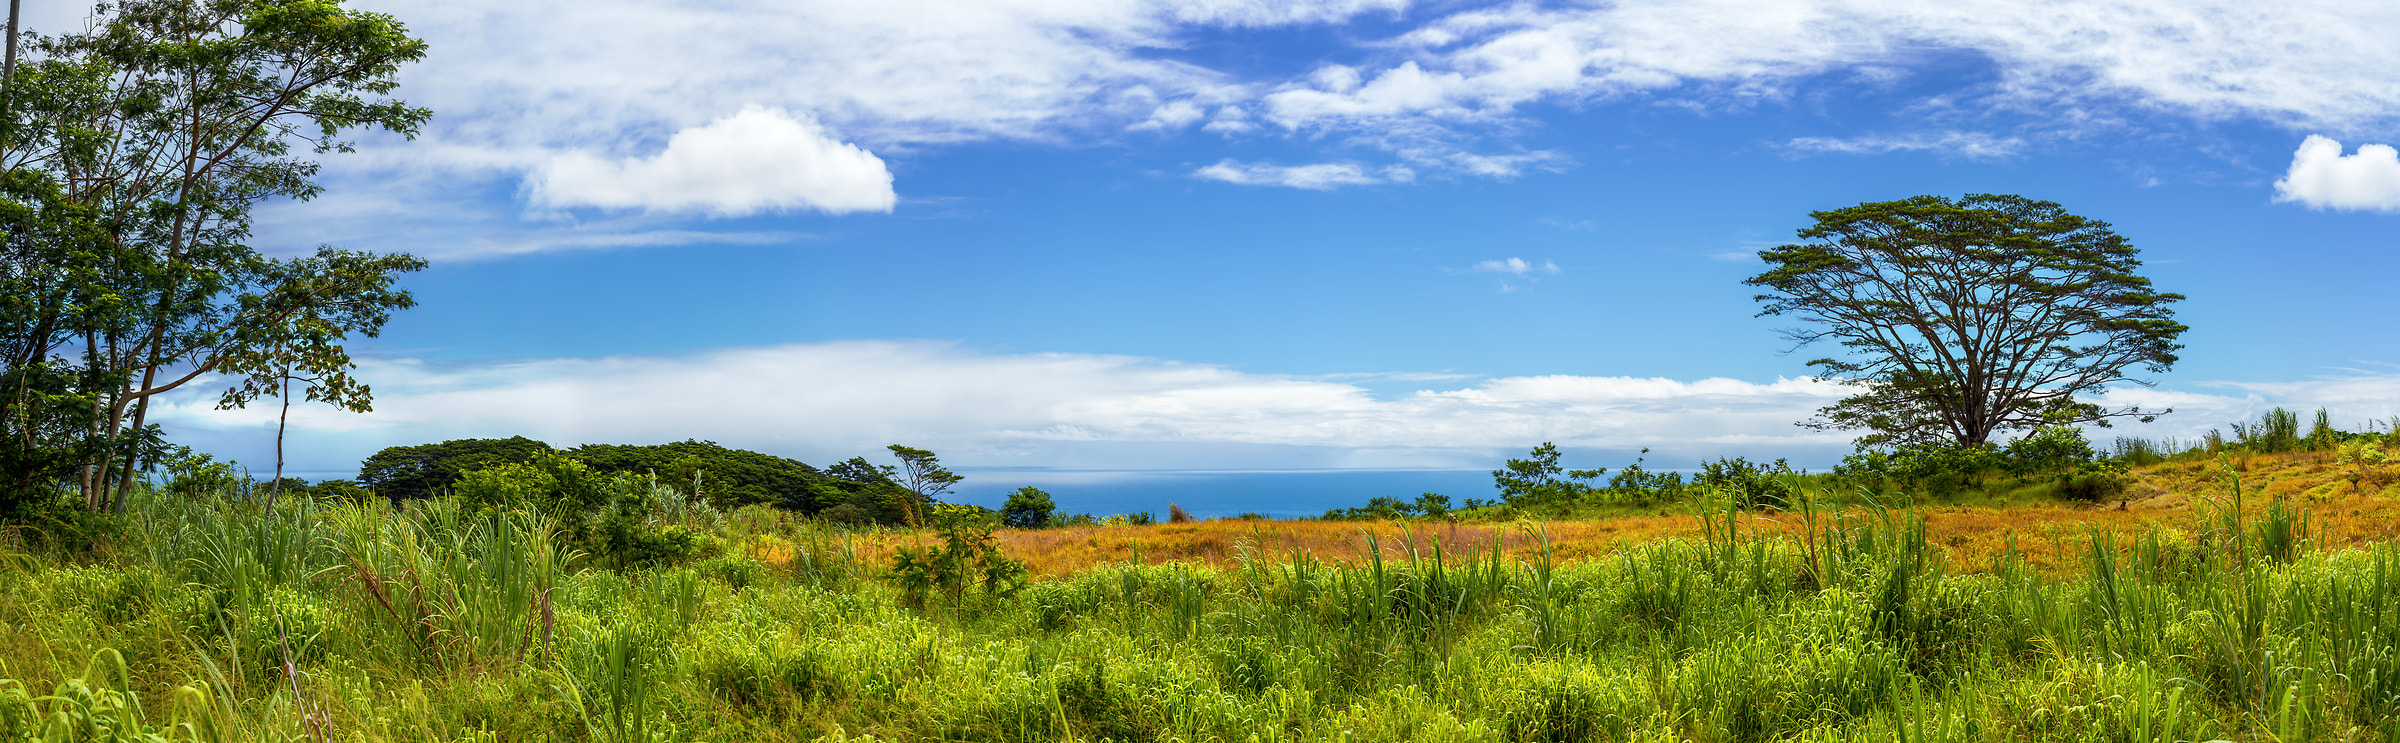 356 megapixels! A very high resolution, large-format VAST photo of a green and blue landscape; panorama photograph created by Jim Tarpo in Honomu, Hawaii.